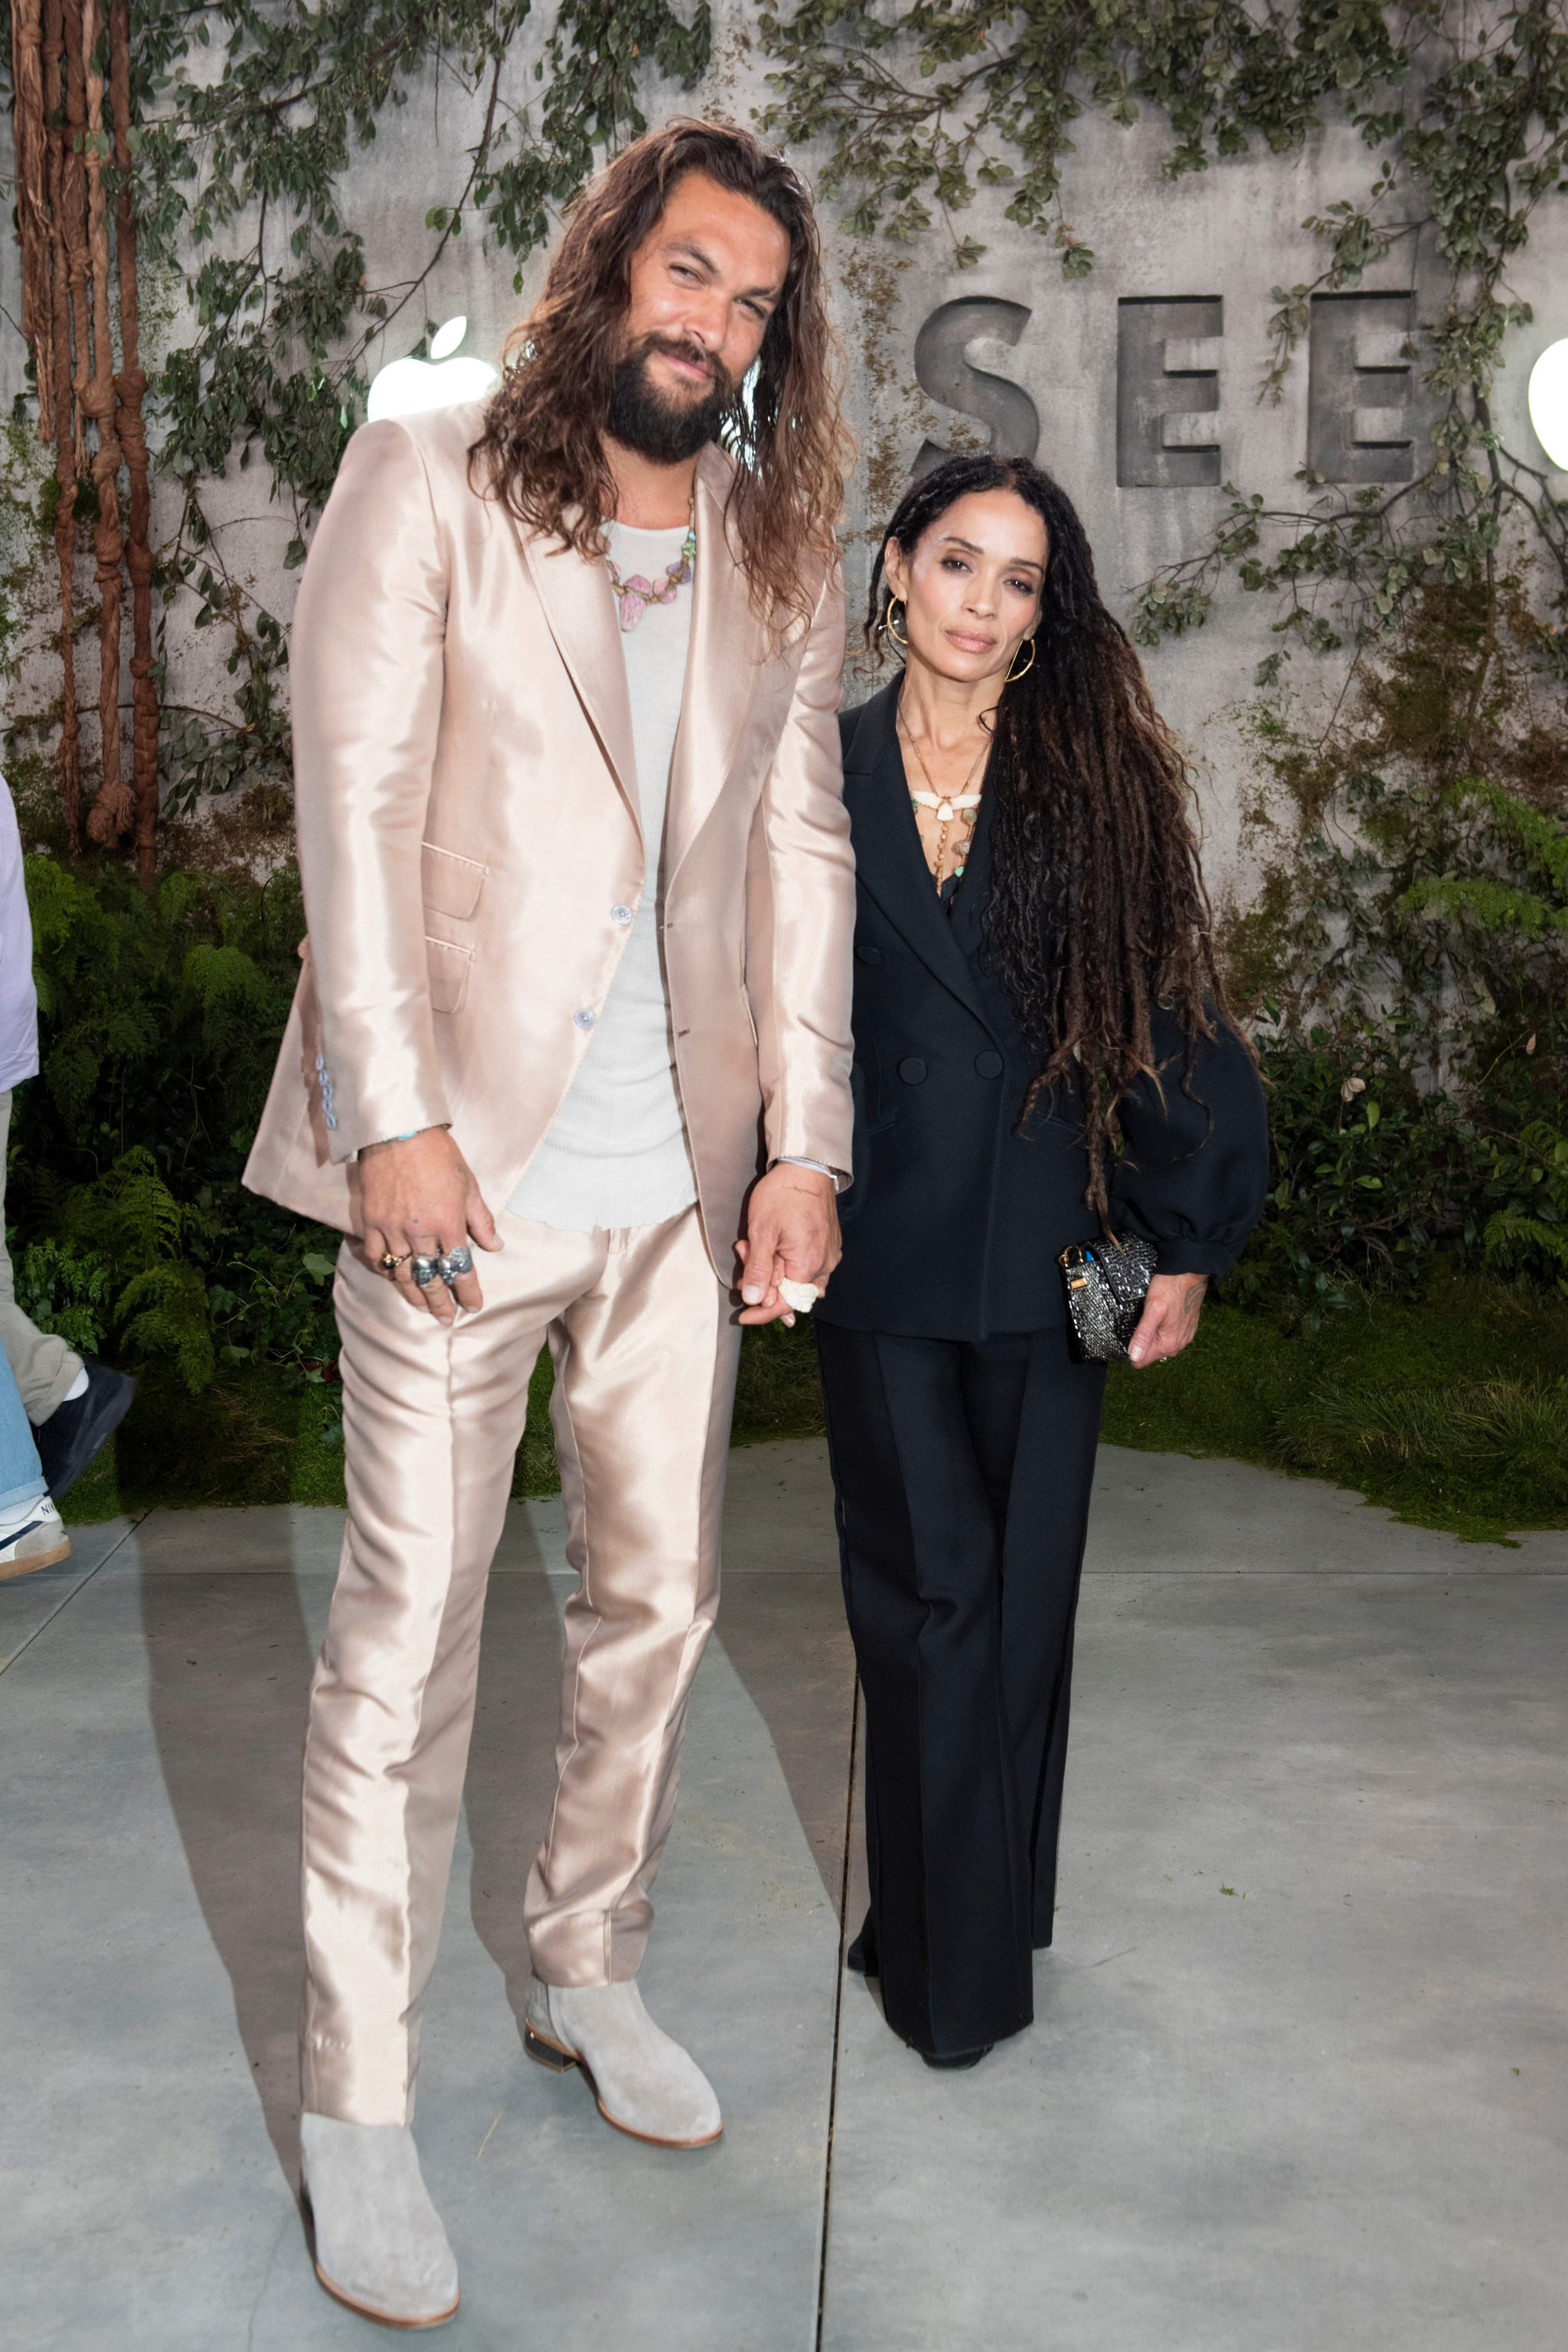 Fashion, Shopping & Style | Jason Momoa's Suit Shimmers Like Rosé  Champagne, and I'm Drunk in Love With This Look | POPSUGAR Fashion Photo 2